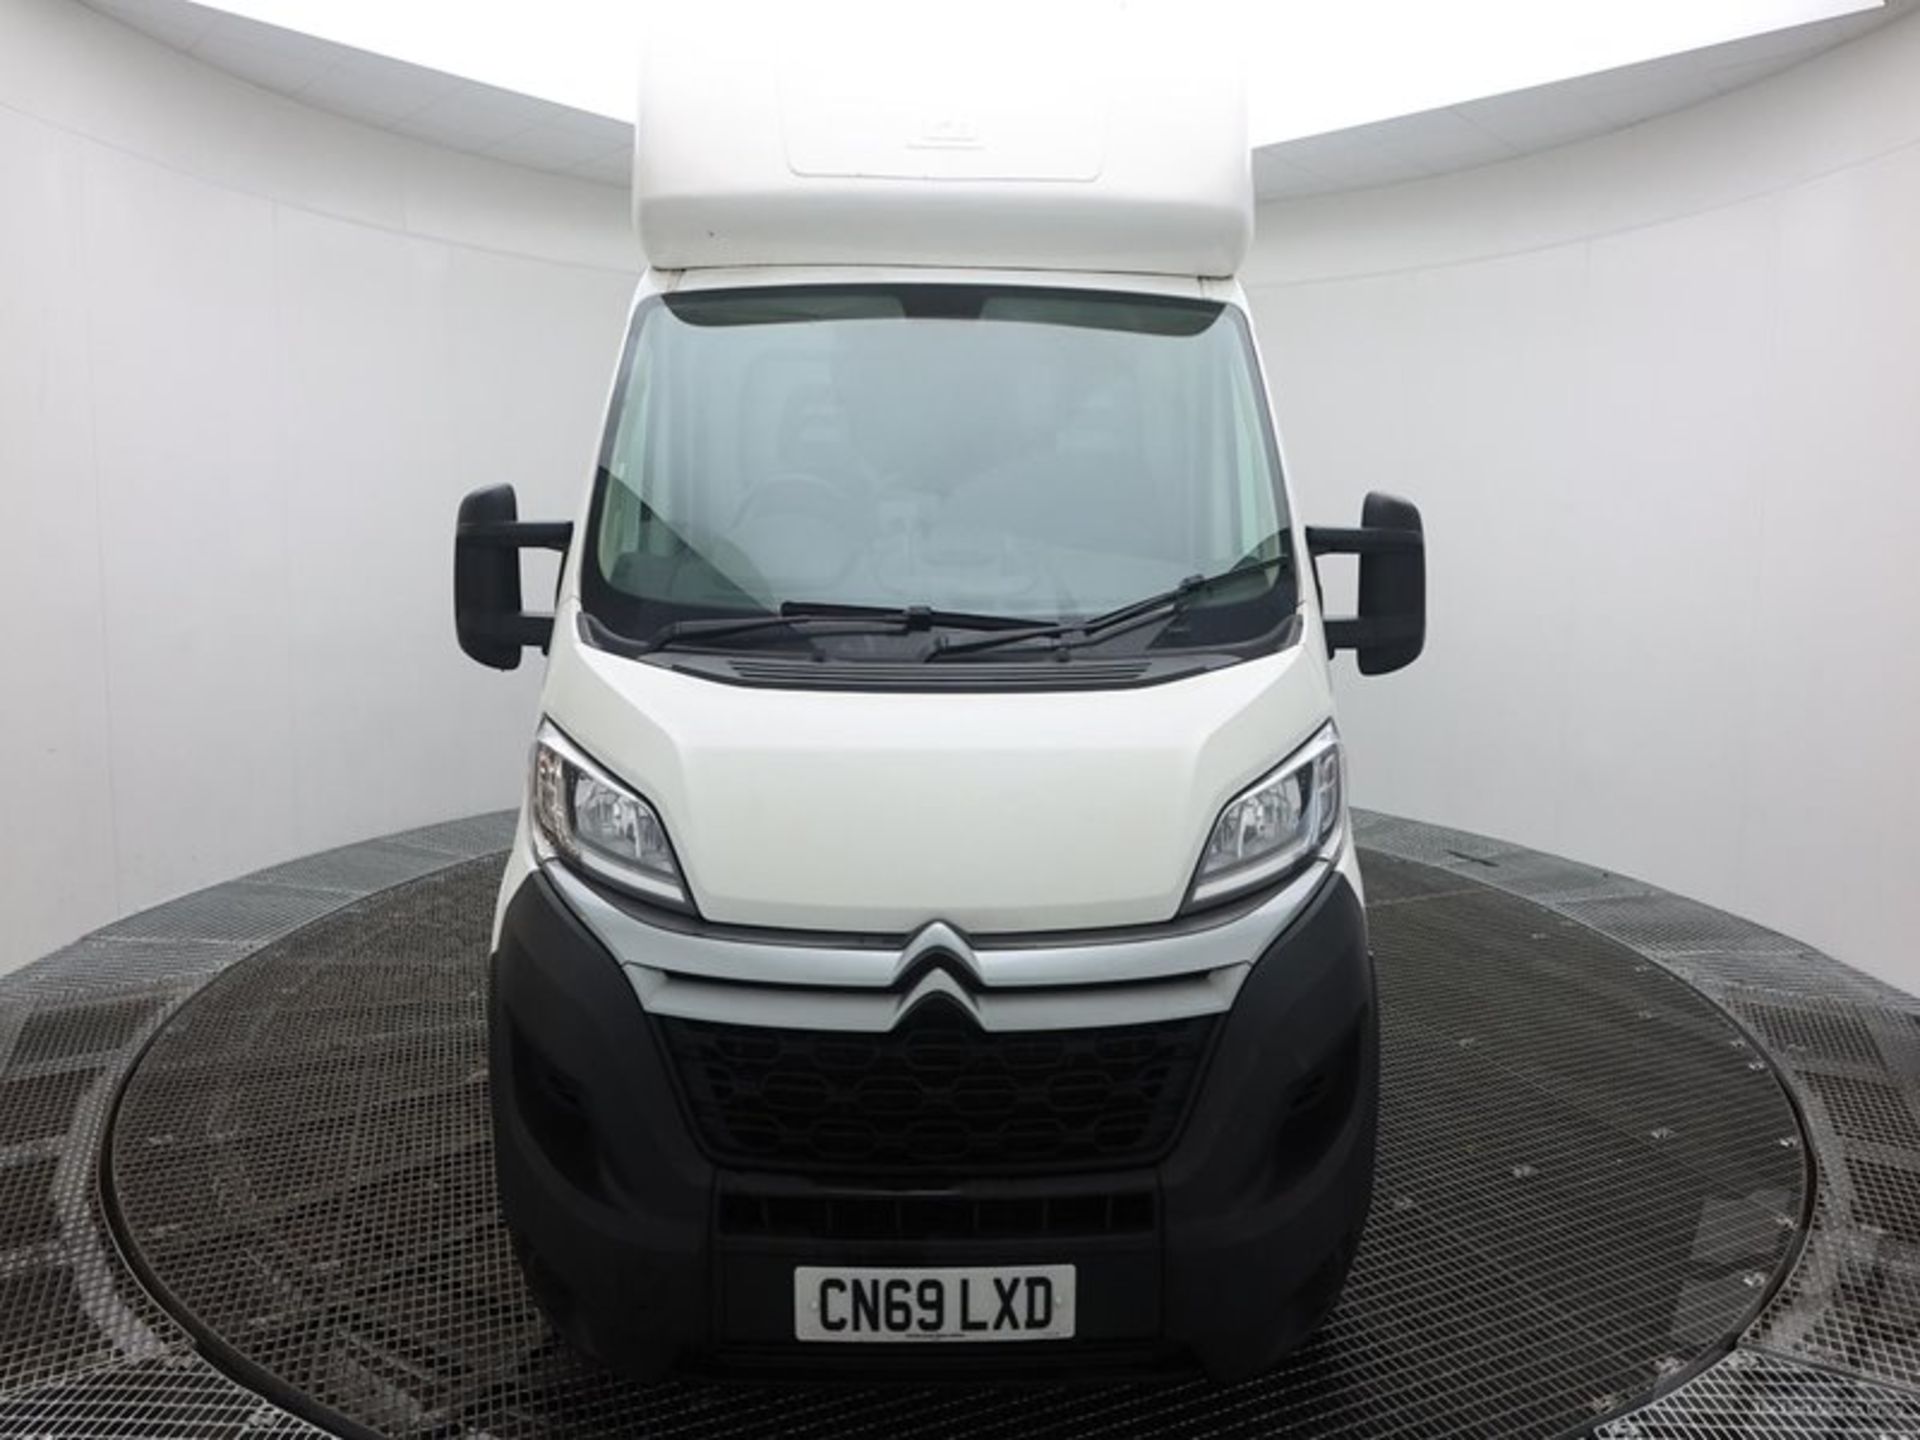 CITROEN RELAY 2.0HDI"160"LONG WHEEL BASE LUTON BOX VAN WITH ELECTRIC TAIL-LIFT -2020 MODEL -1 OWNER - Image 2 of 10